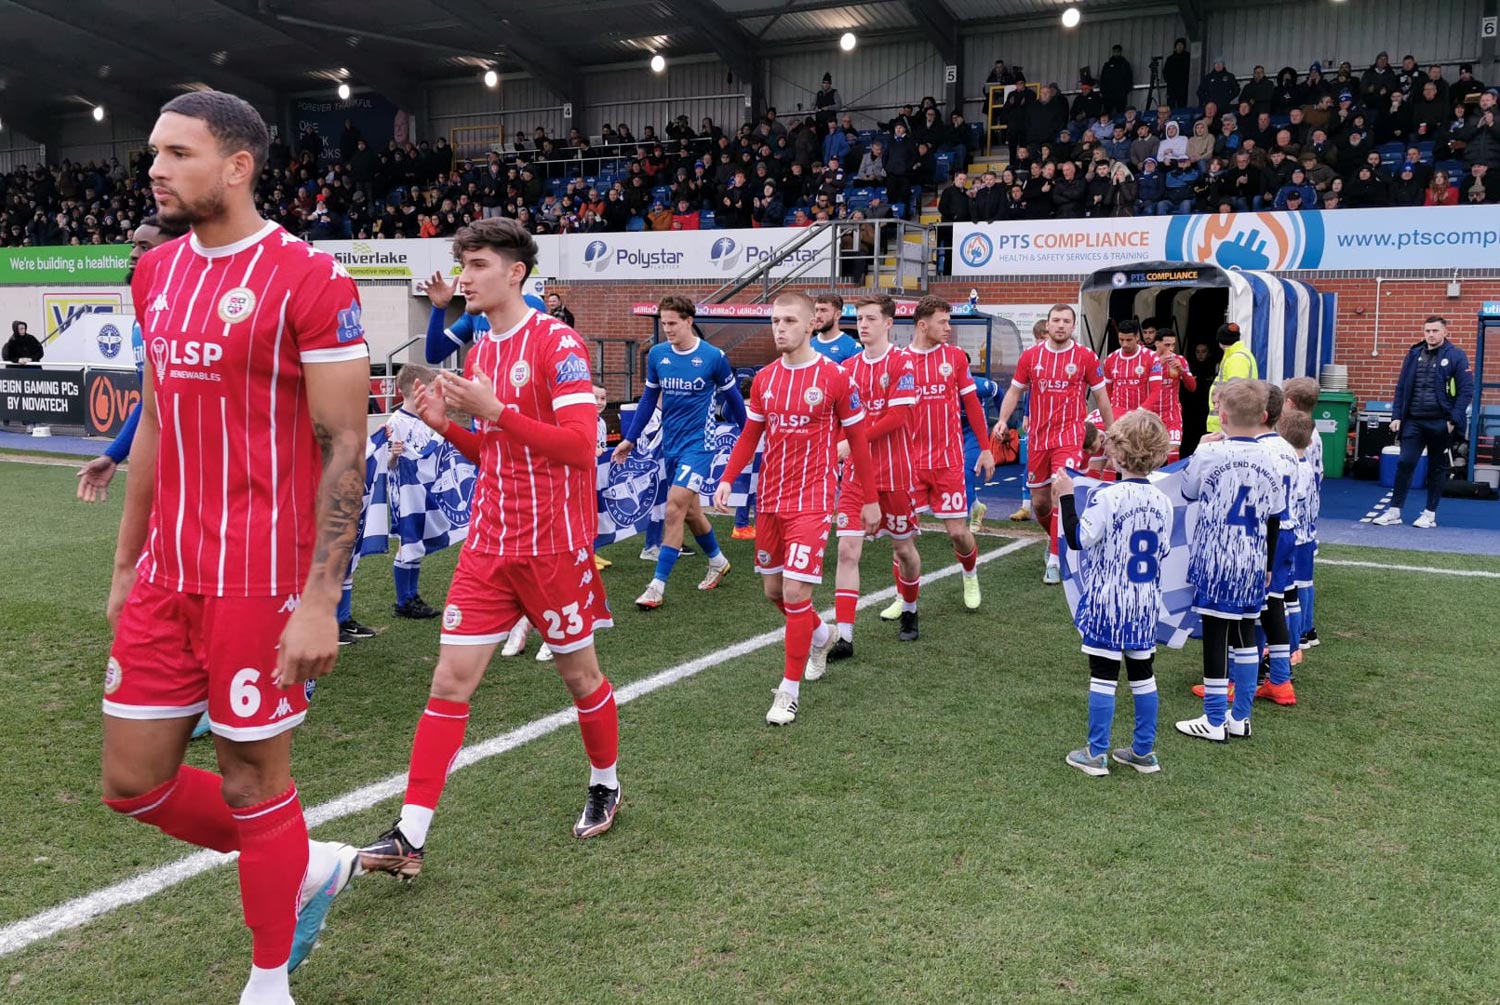 Our sponsored team steps onto the pitch of a professional football club!